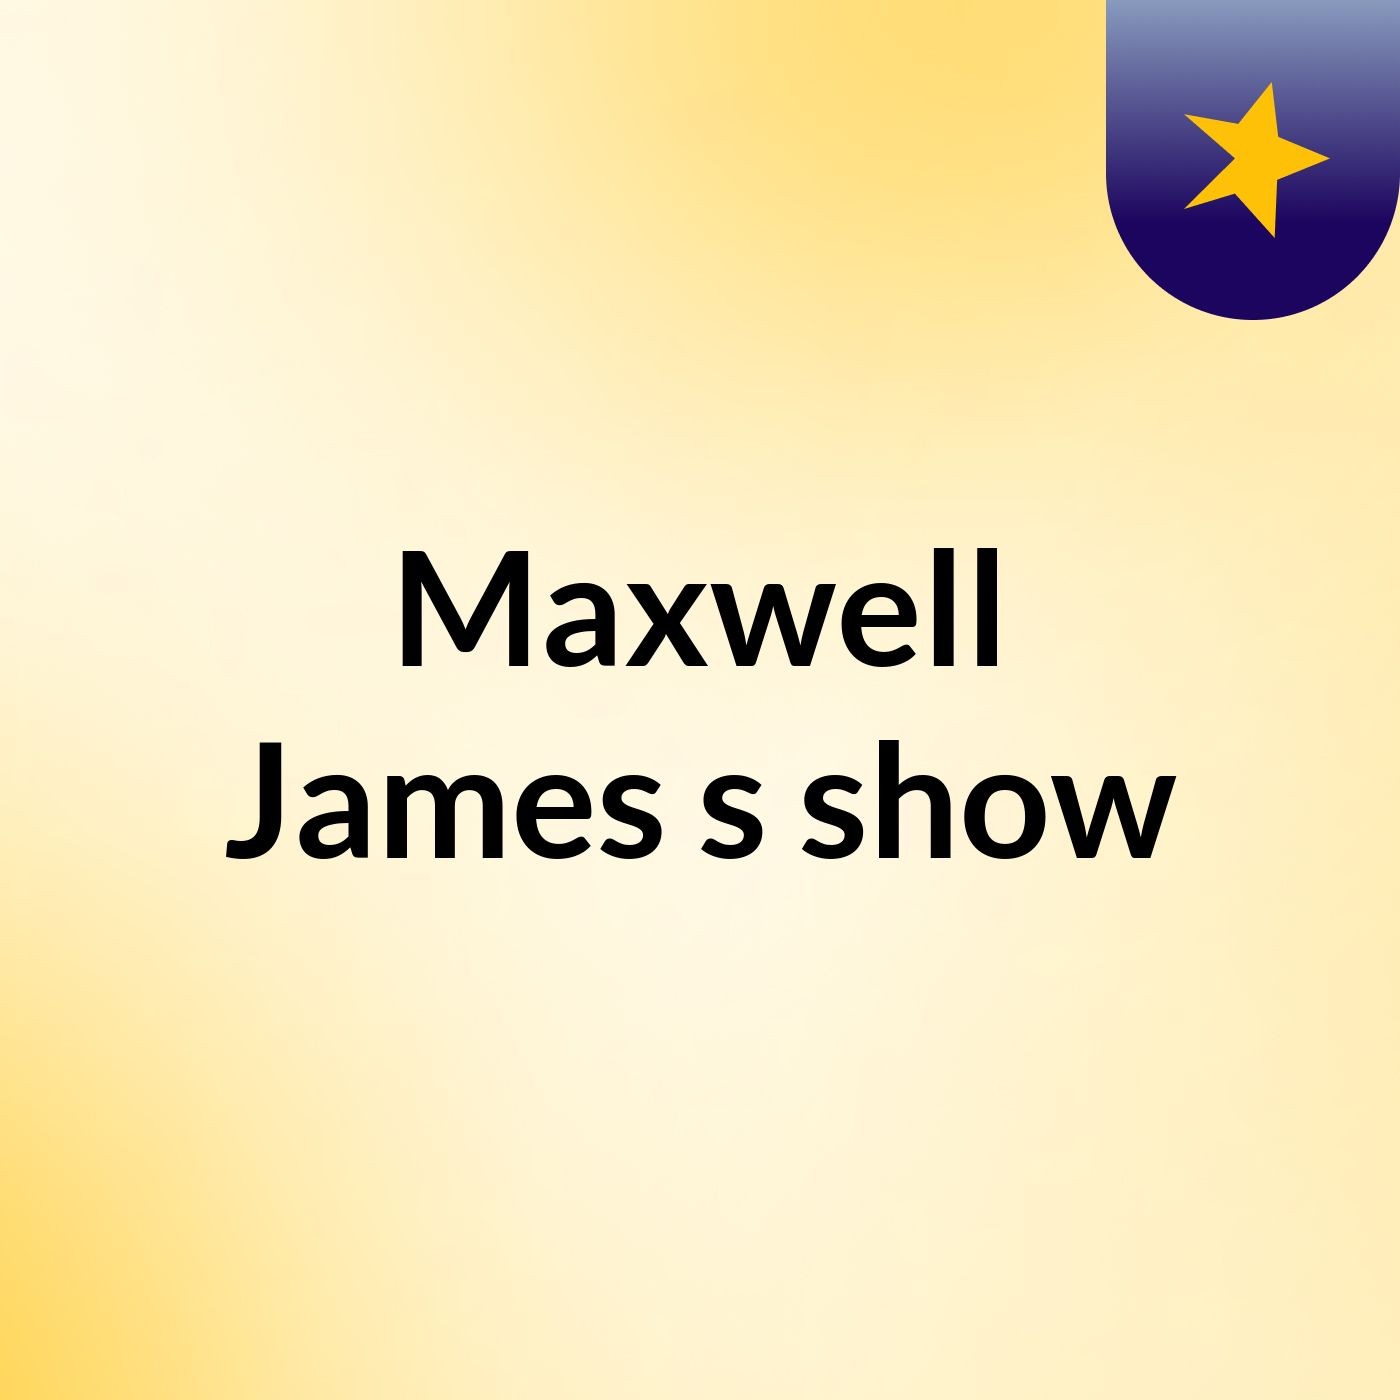 Episode 2 - Maxwell James's show